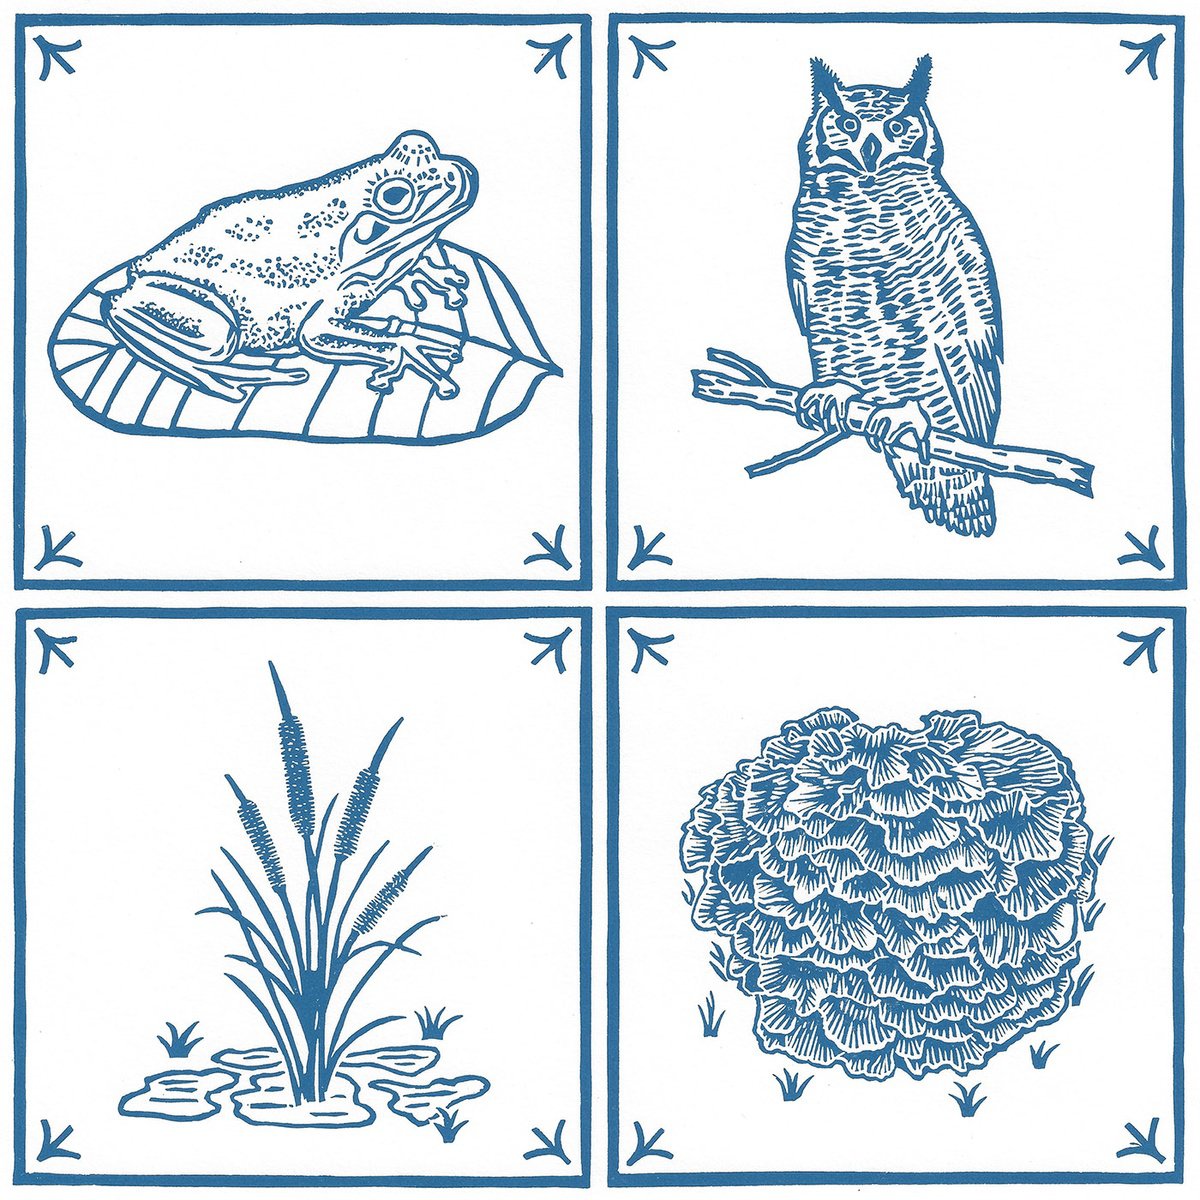 Frog/Great Horned Owl/Cattail/Hen of the Woods by Francis Stanton